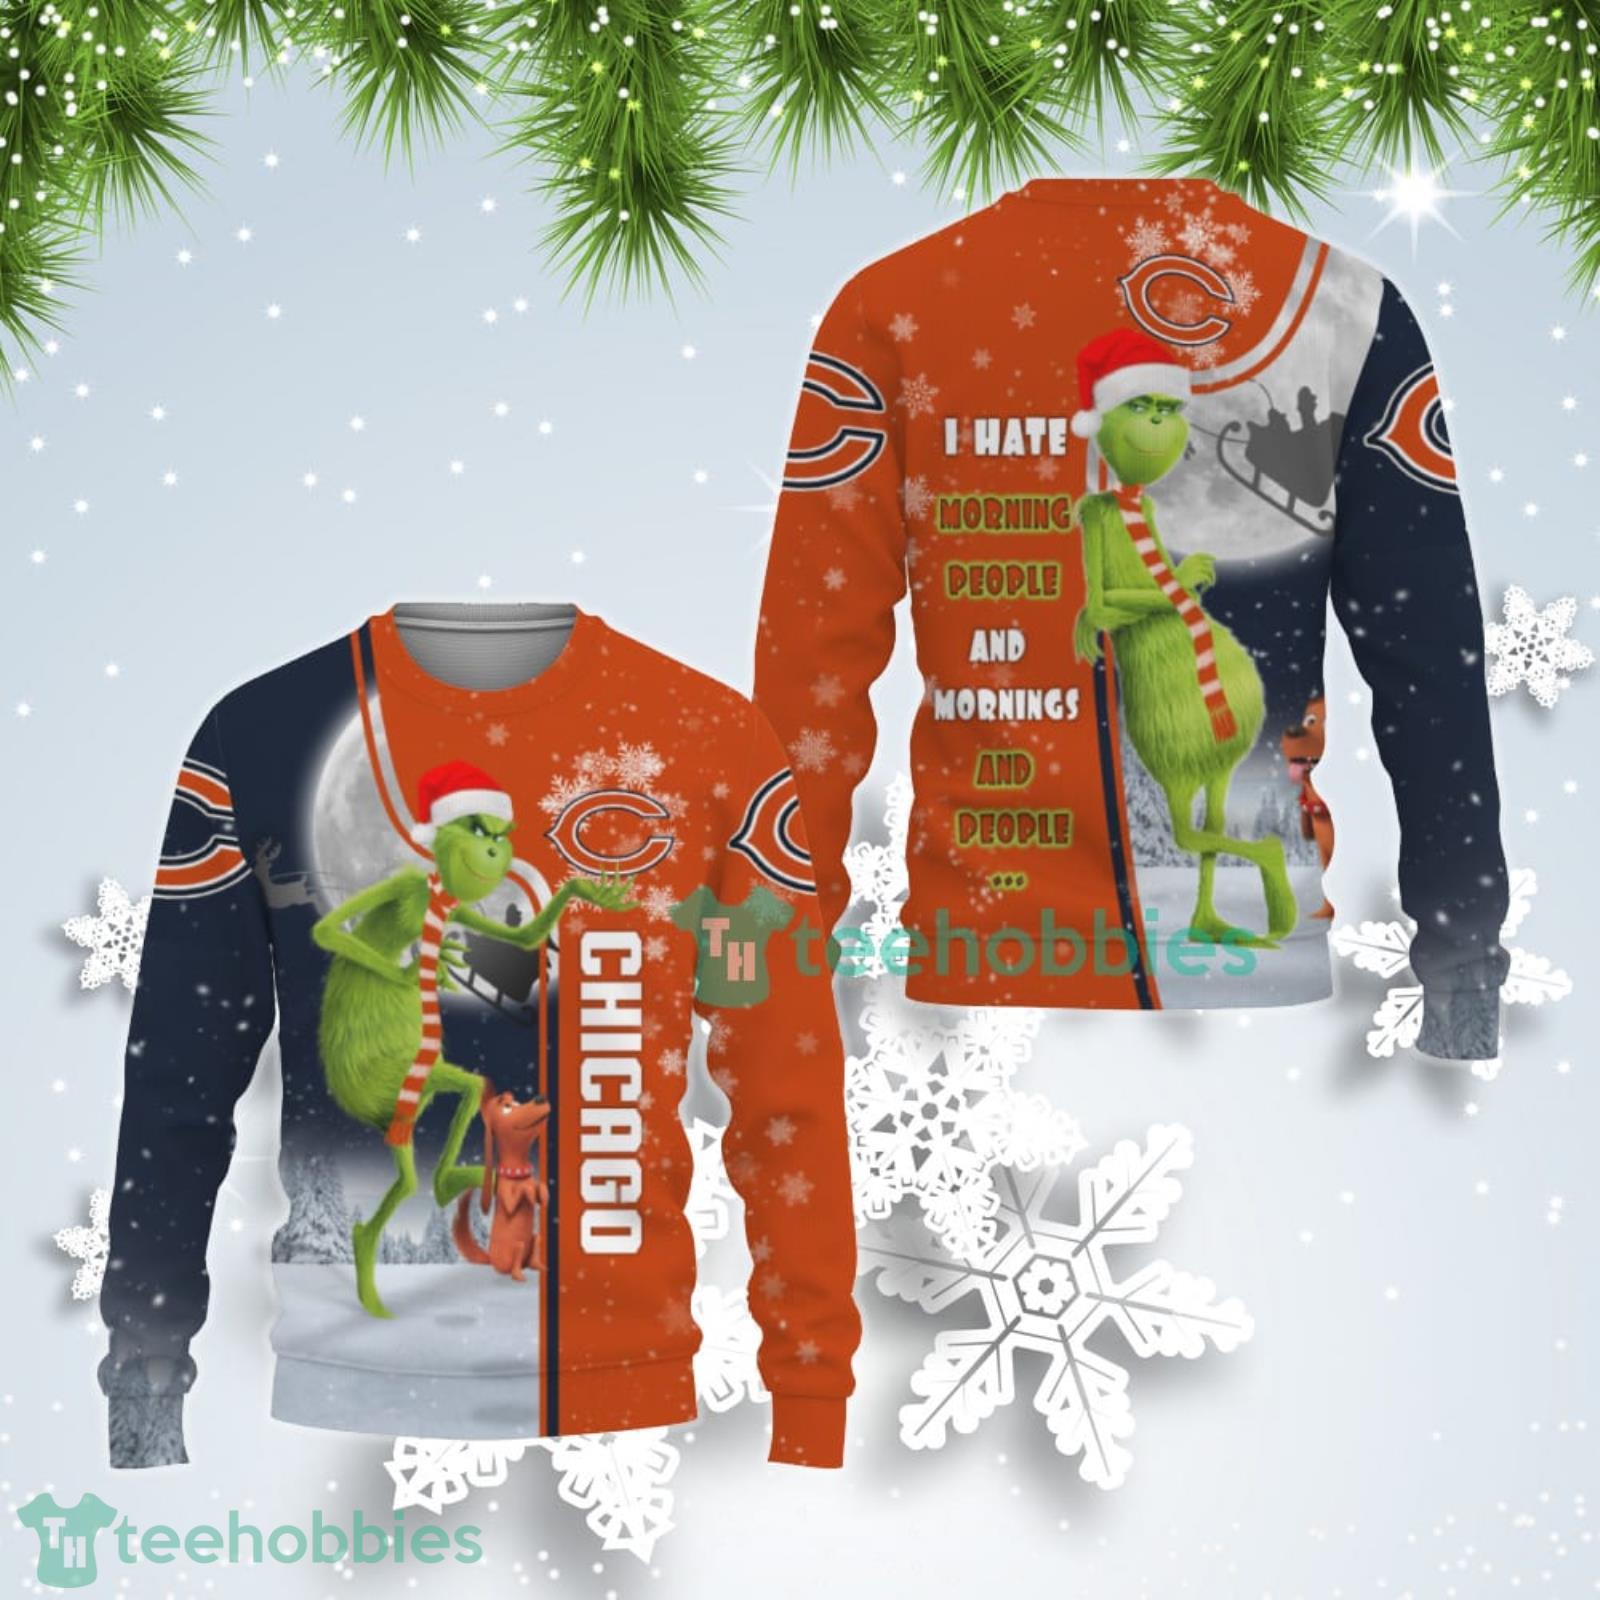 ugly chicago bears christmas sweater